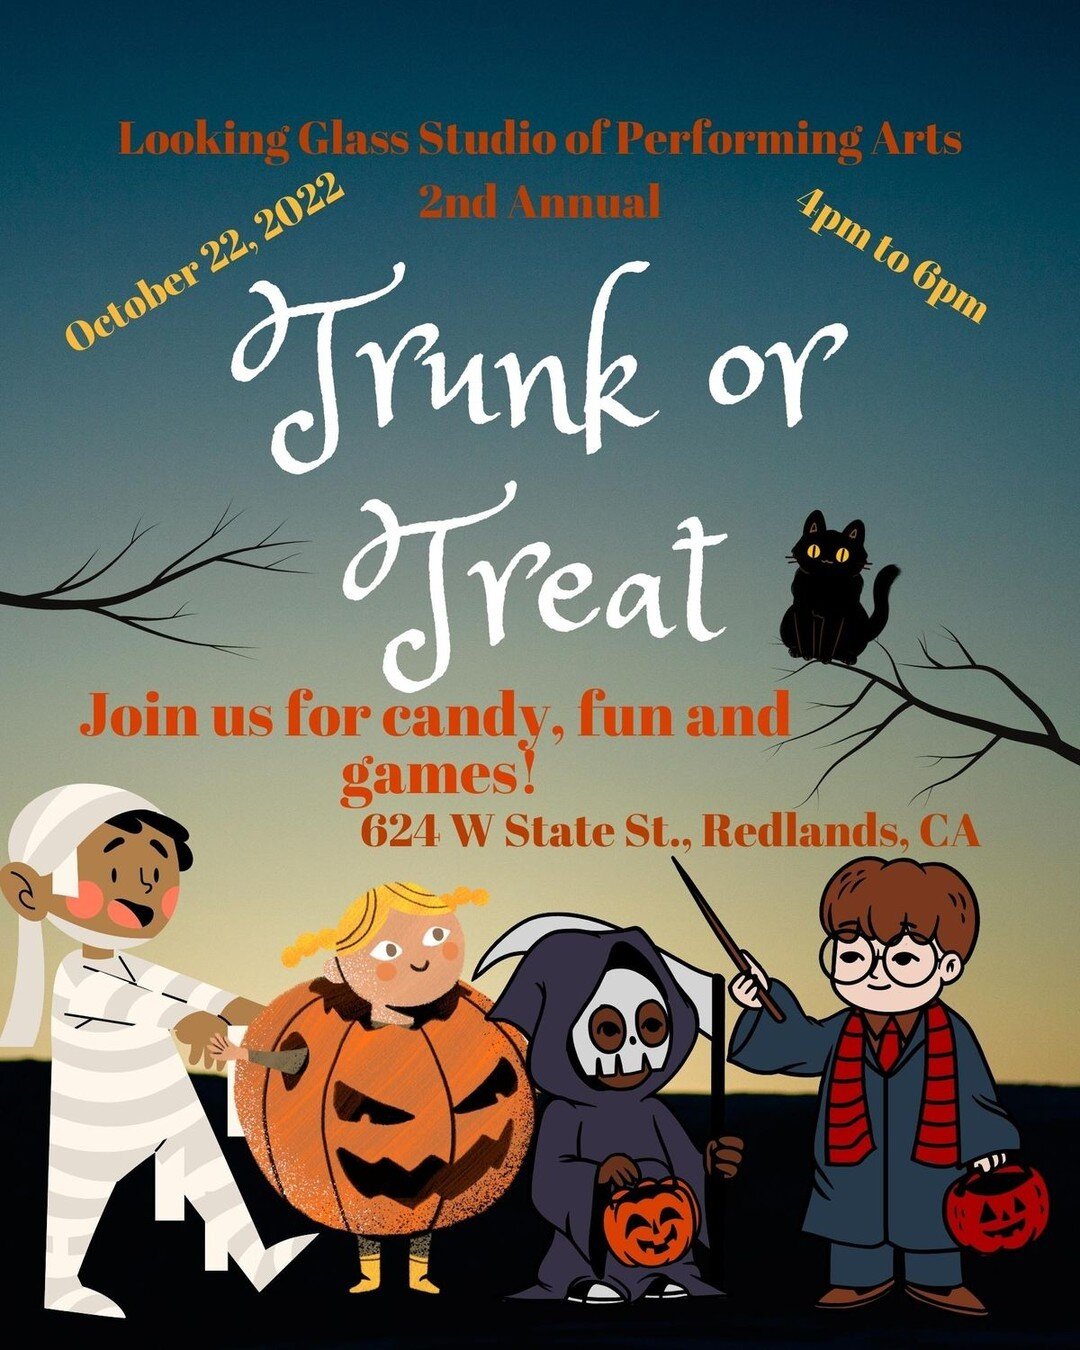 Don't forget to join us October 22nd, 2022 from 4pm to 6pm for our 2nd annual Trunk or Treat event! 

This event is FREE!!! And open to ANYONE.

We will have candy, dancing, and games!! We will also have a Jumper for the kids!!

Hope to see you there